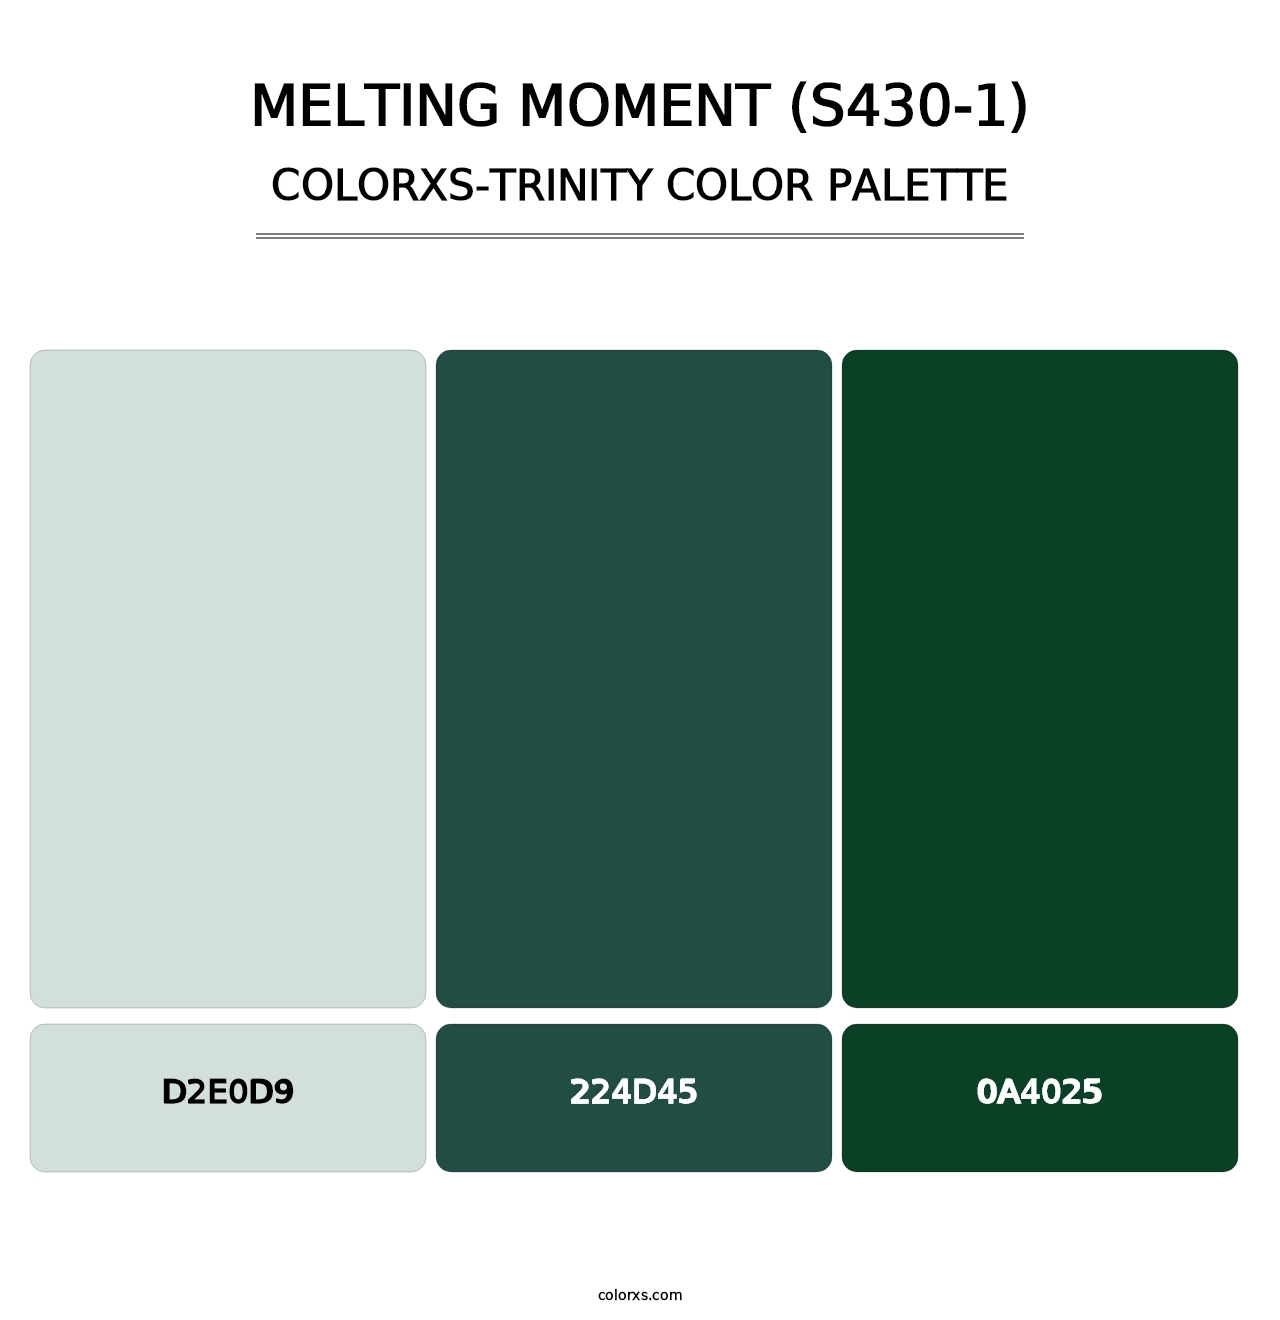 Melting Moment (S430-1) - Colorxs Trinity Palette